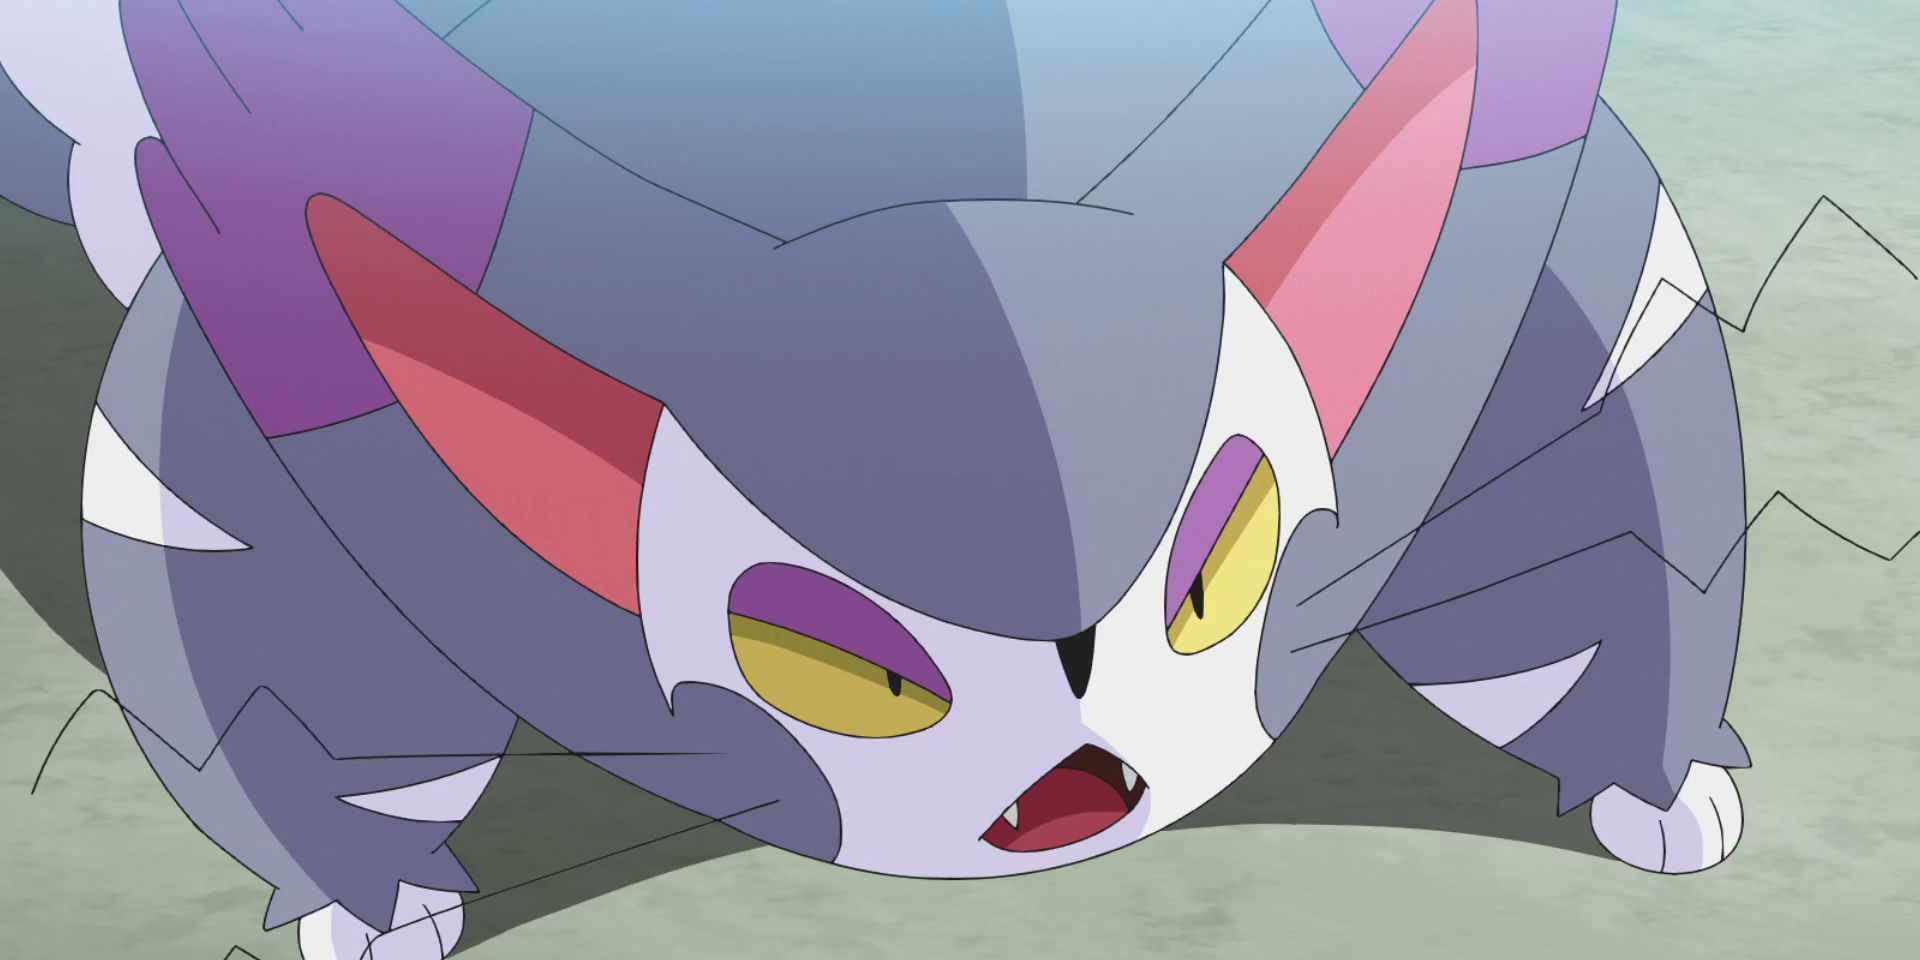 Team Rocket's Purugly ready to attack in the Pokémon anime.